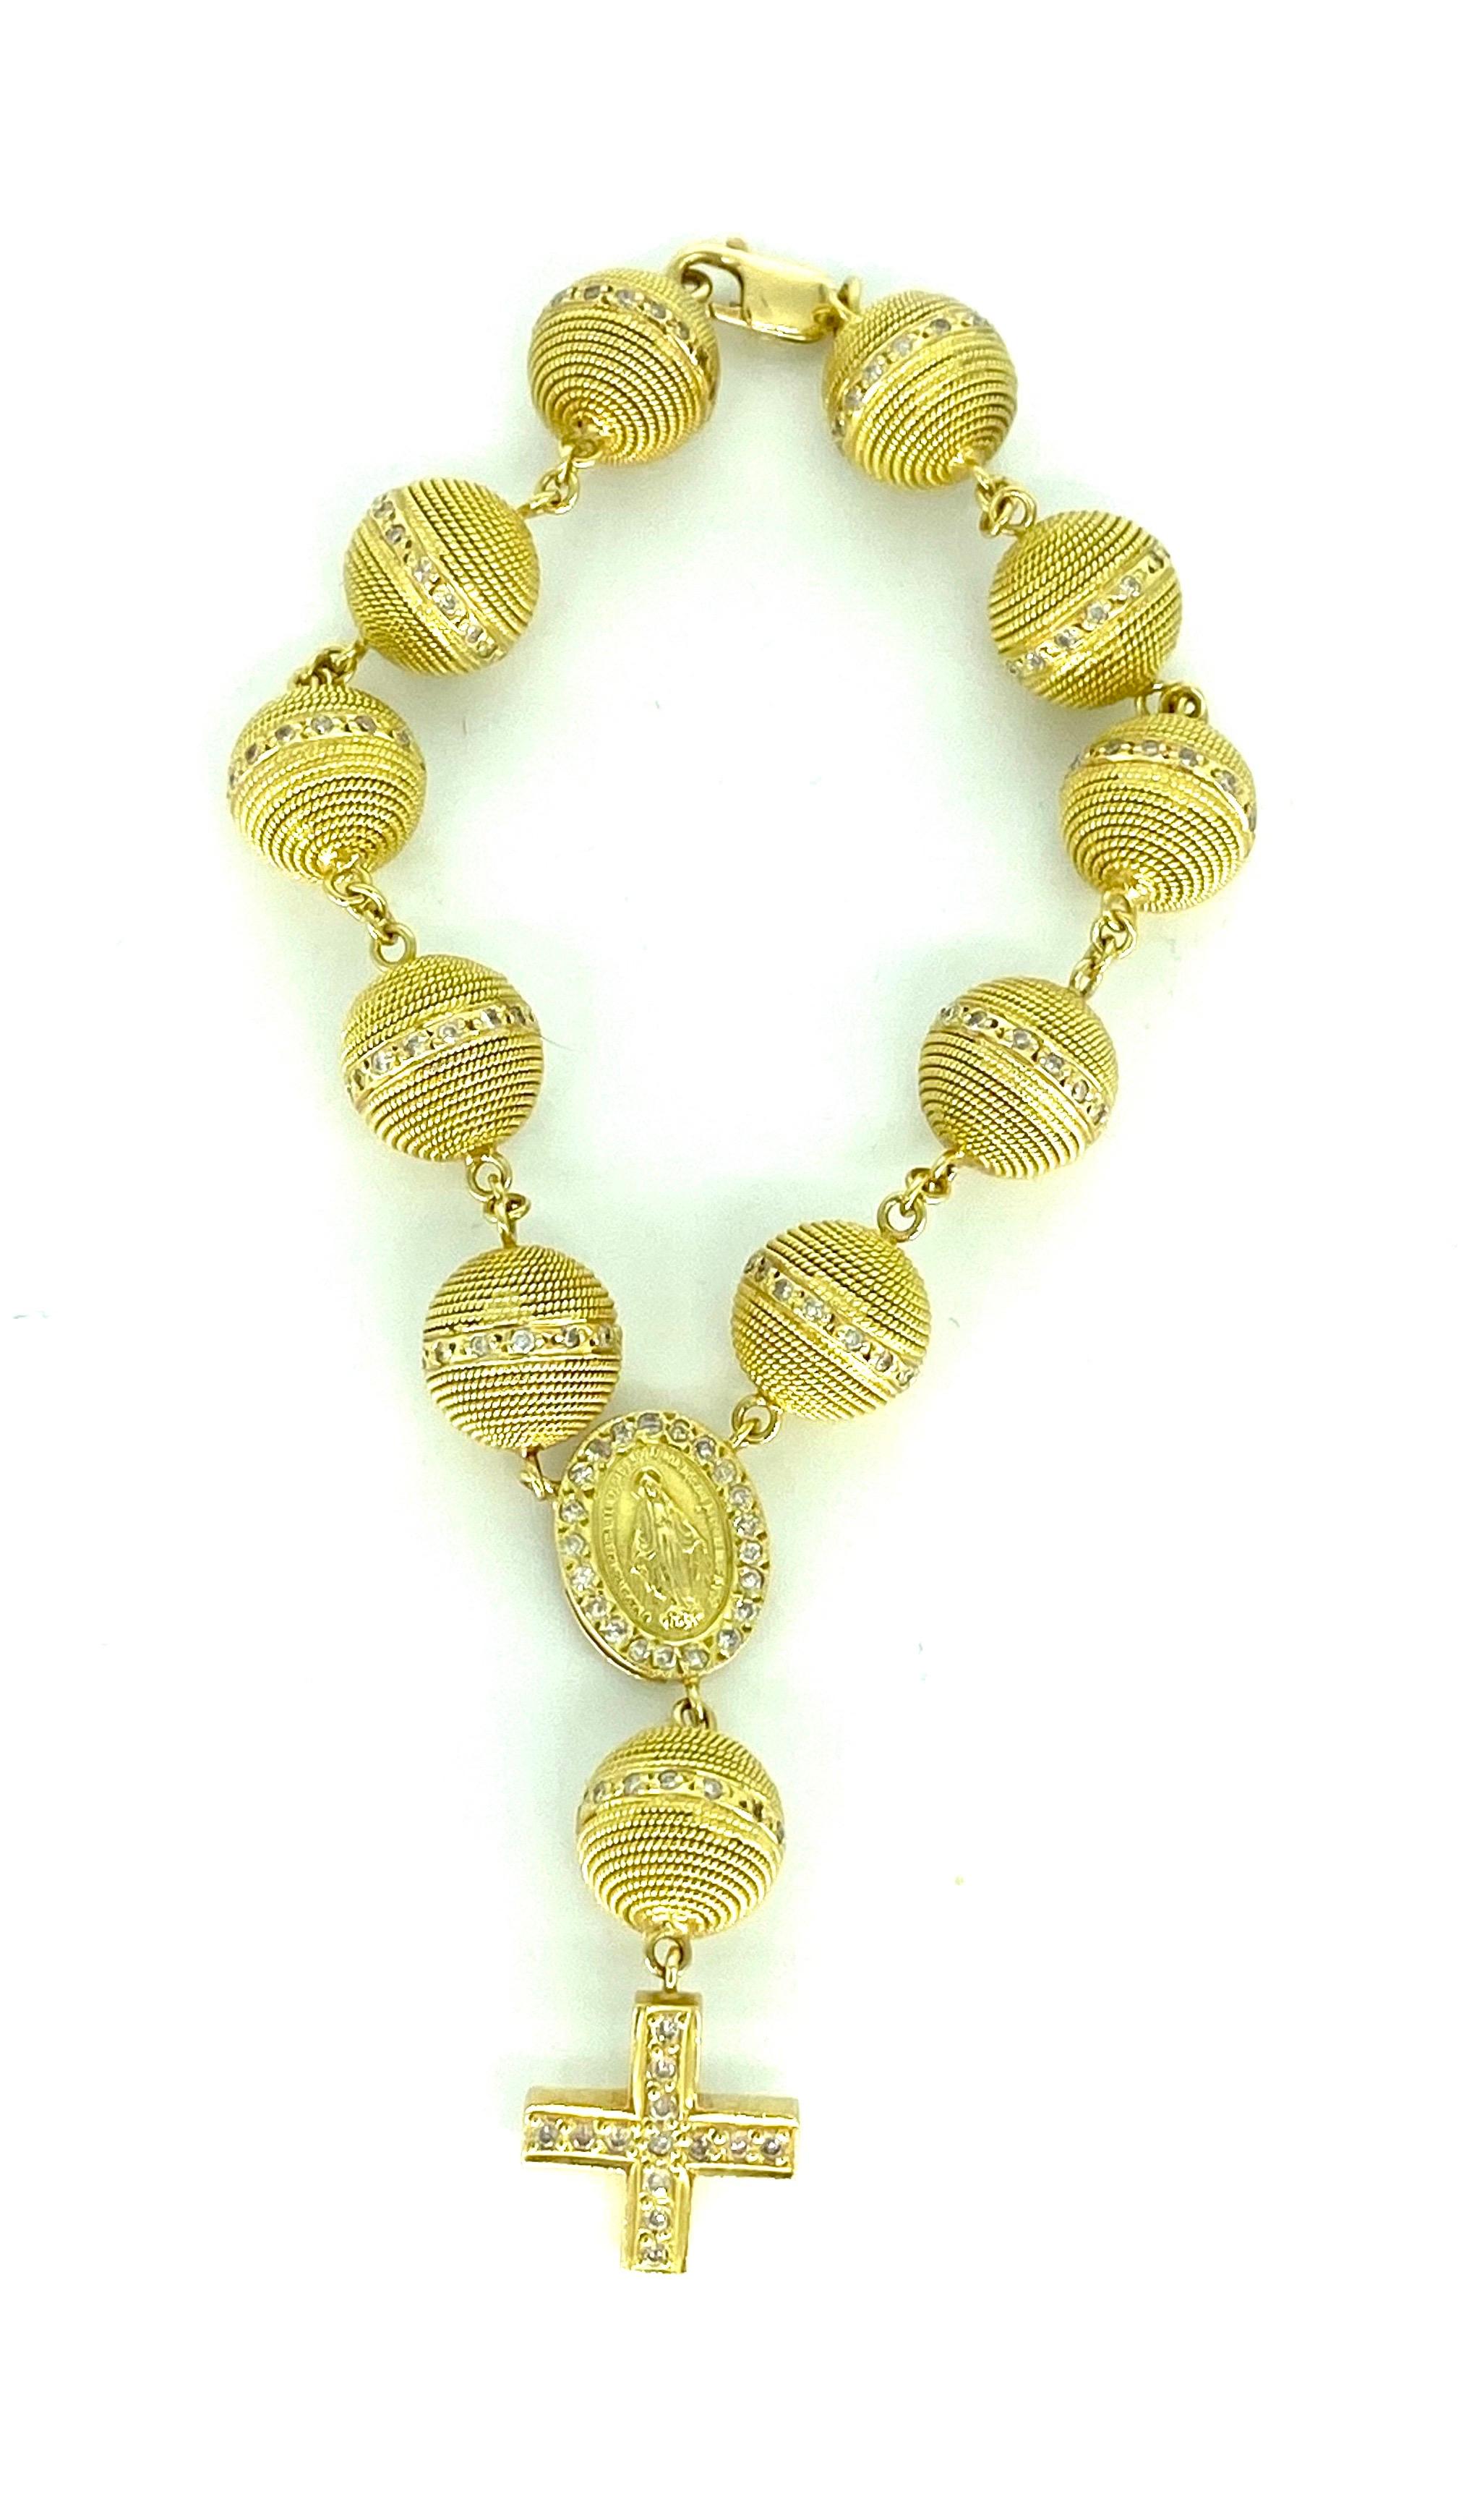 Vintage 3.50 Carat Diamond 11mm Rope Beads Rosary 18k Gold Bracelet. ONE-OF-A-KIND
The bracelet is 7 inches in length and 11mm each bead. This bracelet is made of 18k solid gold and is heavy weighing 40.6 grams. 